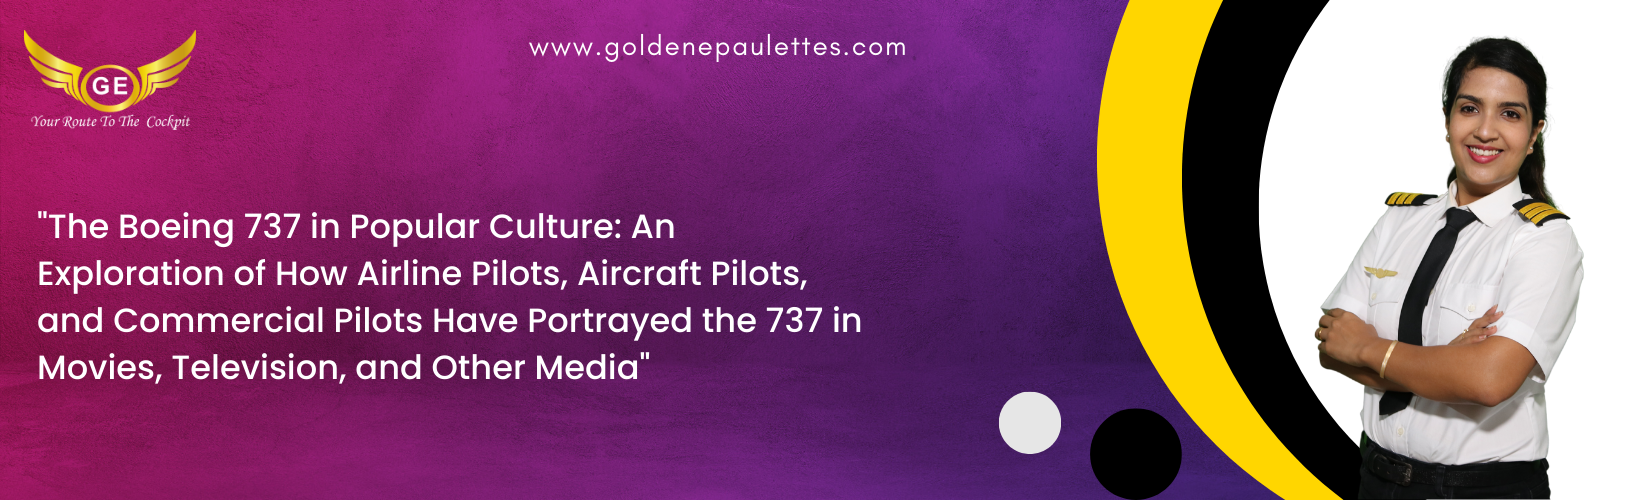 The Boeing 737 in Popular Culture